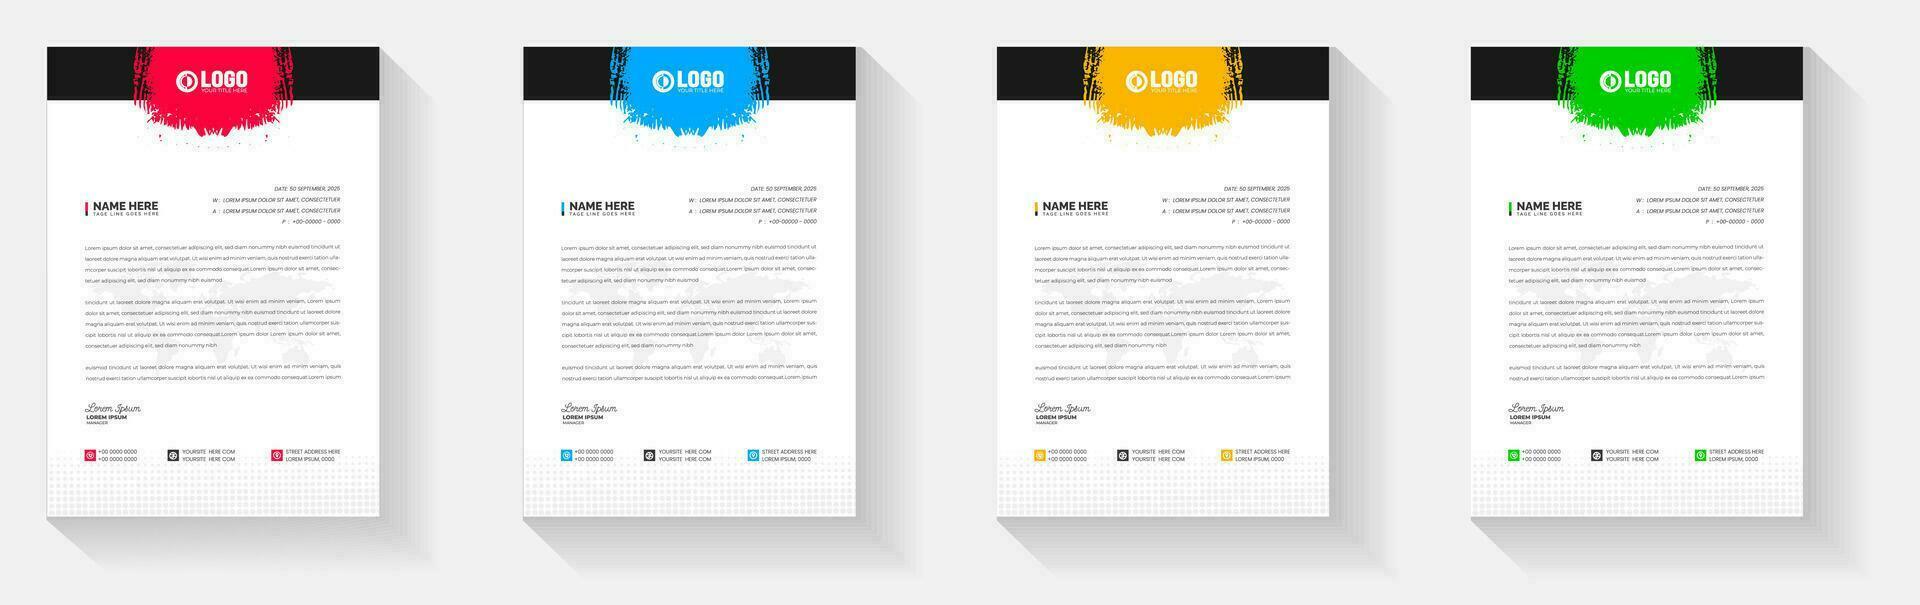 Grunge watercolor paint brush strokes texture effect corporate business letterhead design template set with red, blue, green and yellow color. vector